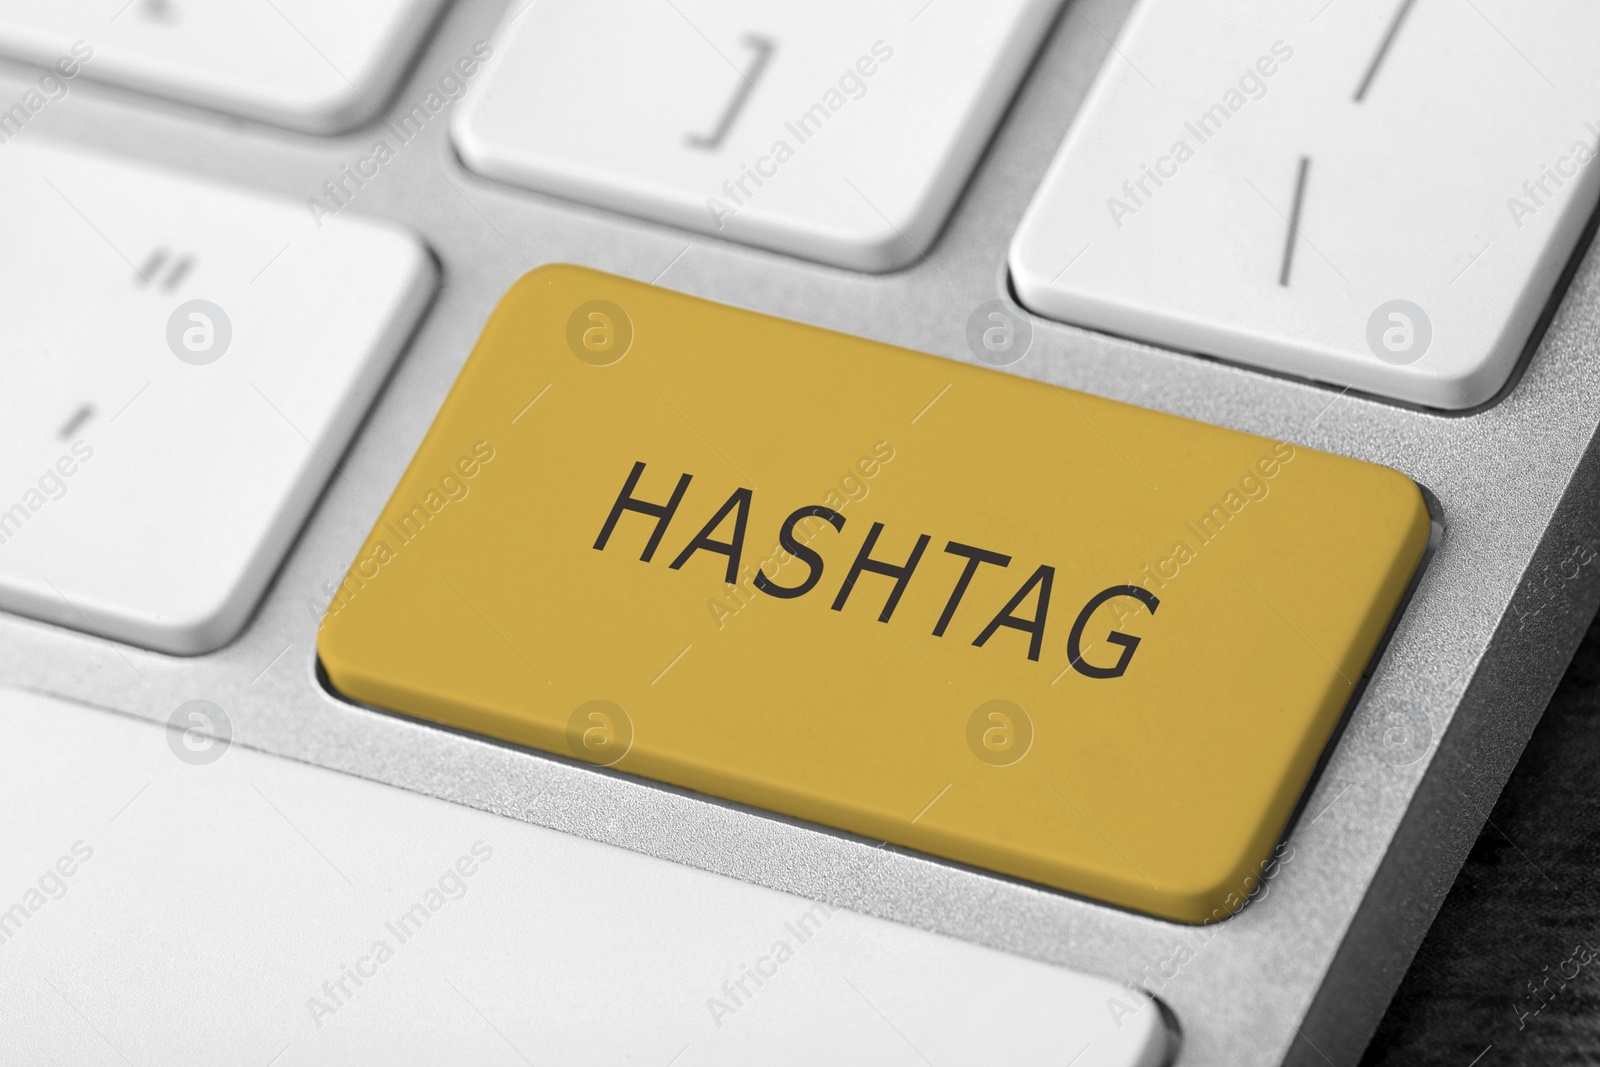 Image of Yellow button with word HASHTAG on computer keyboard, closeup